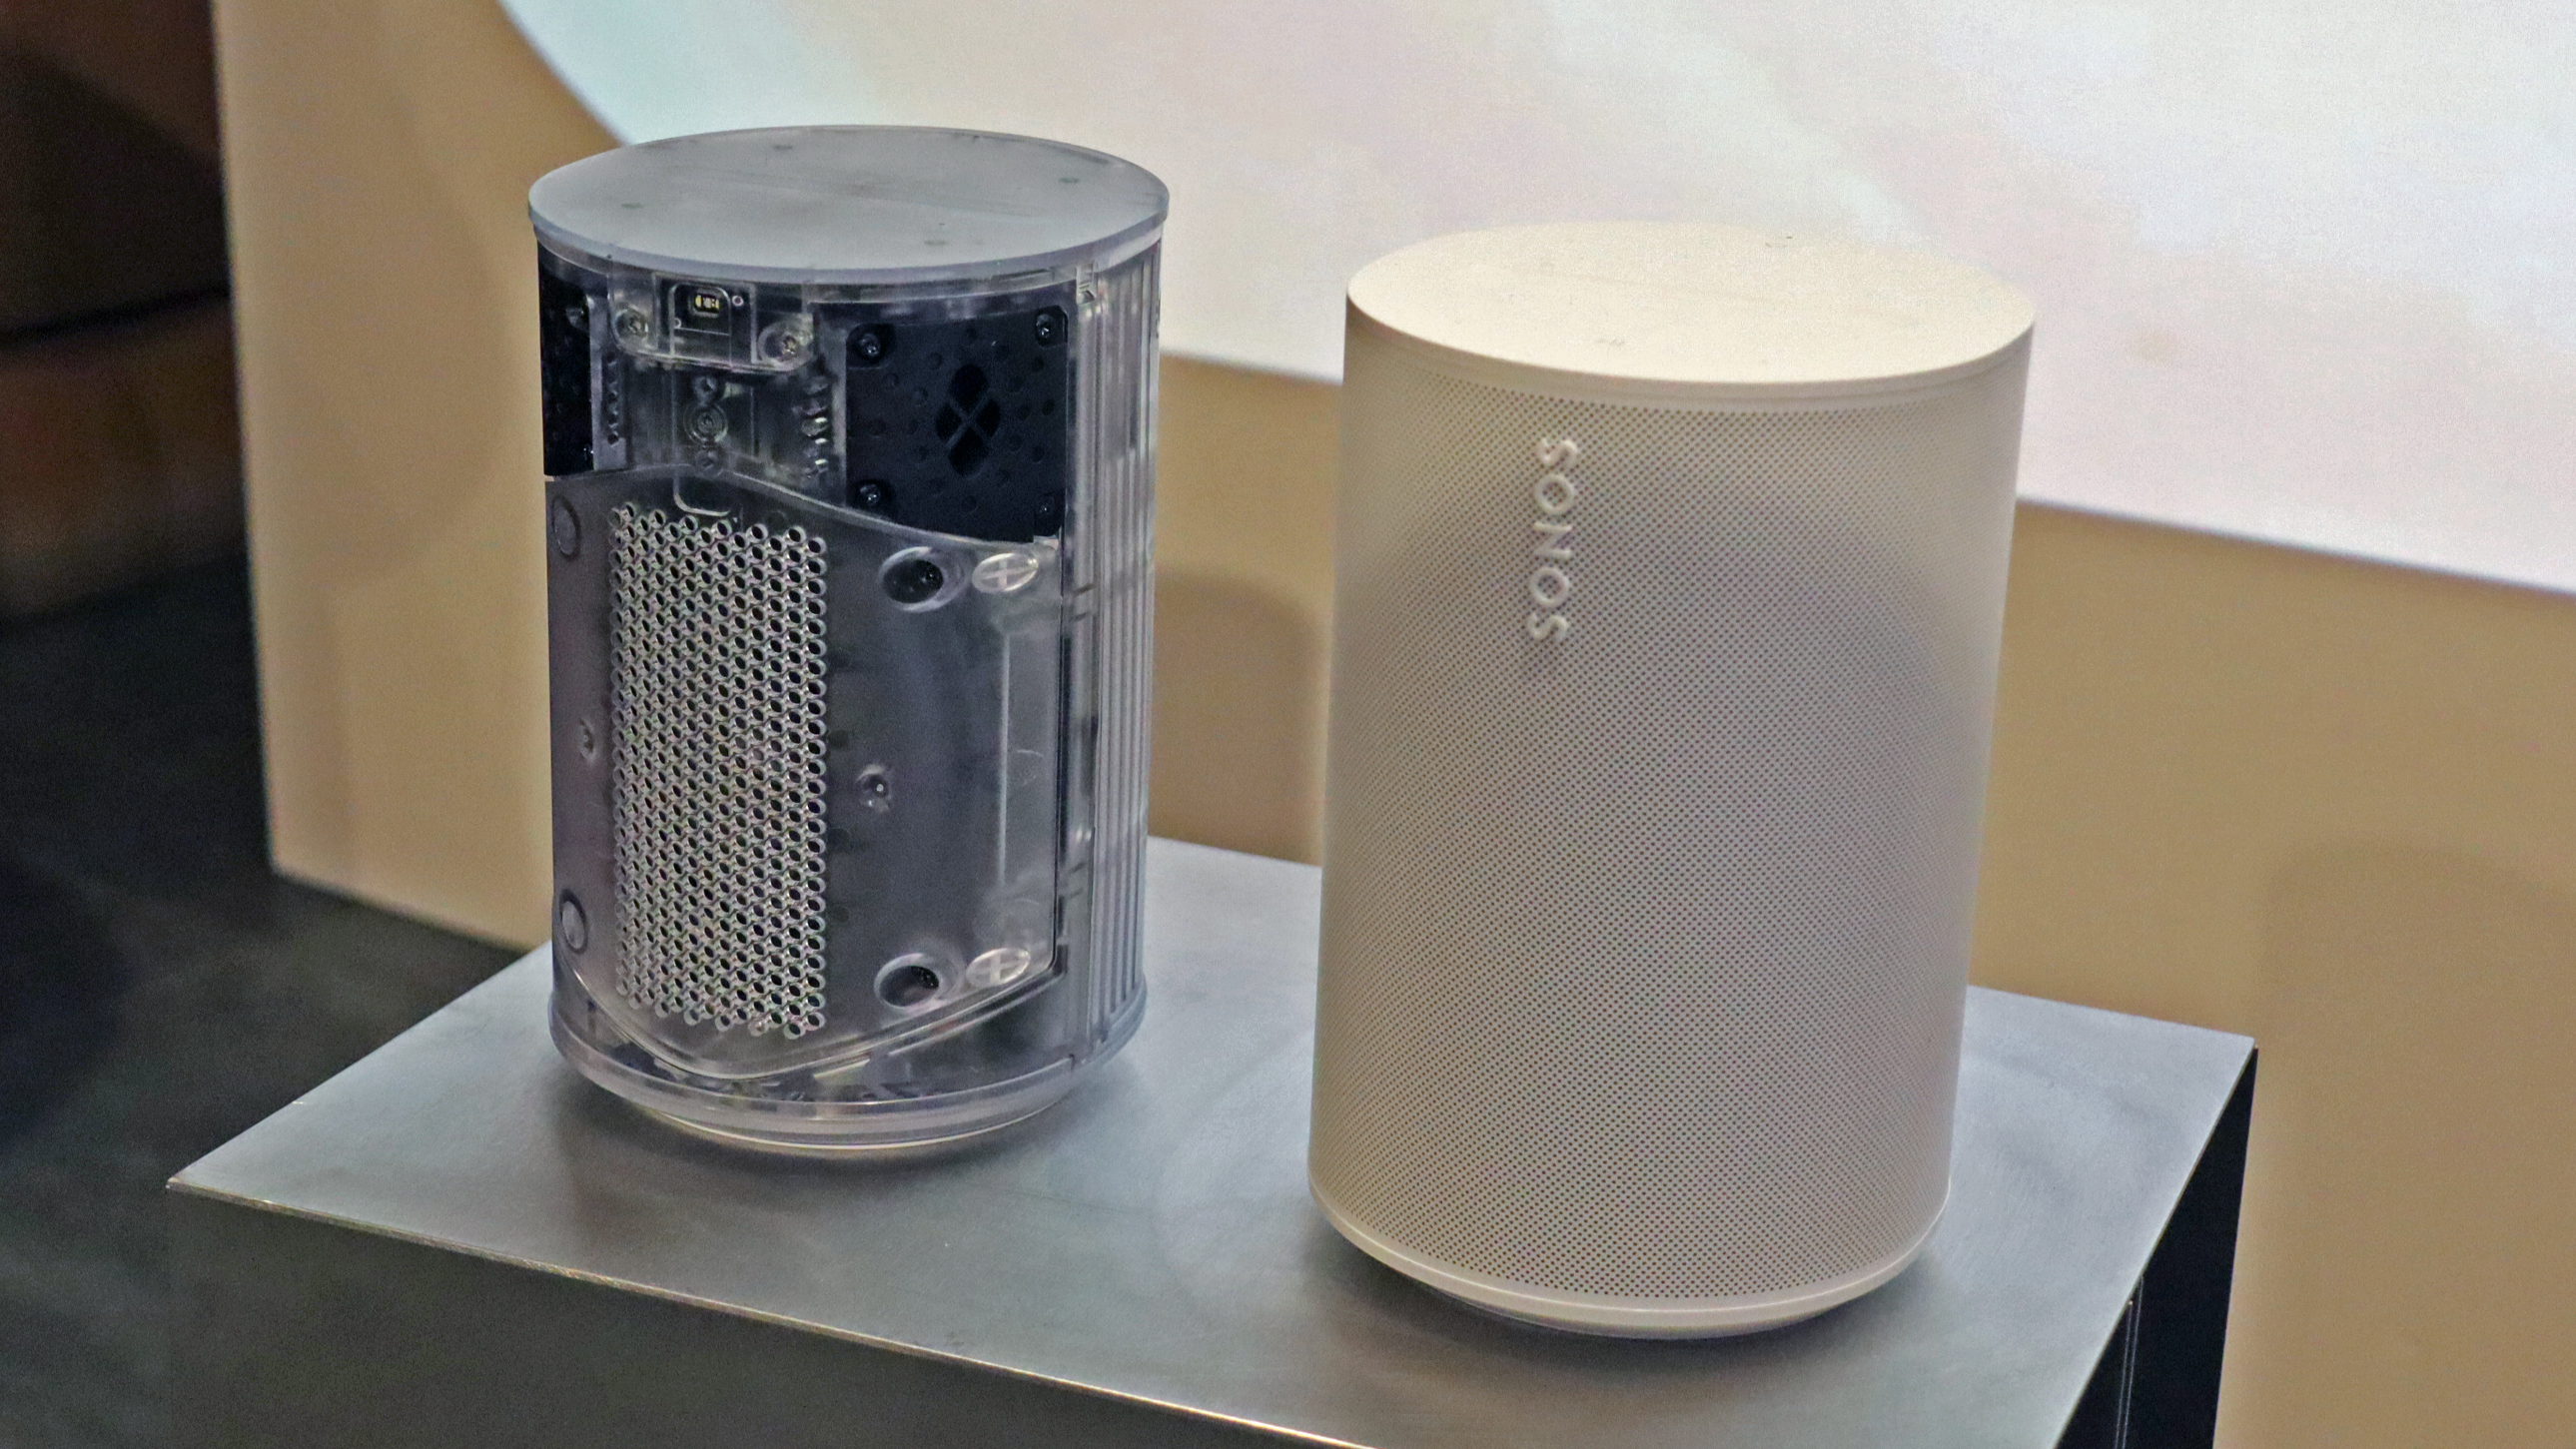 Sonos Era 100 speaker with the body removed, exposing the speaker components